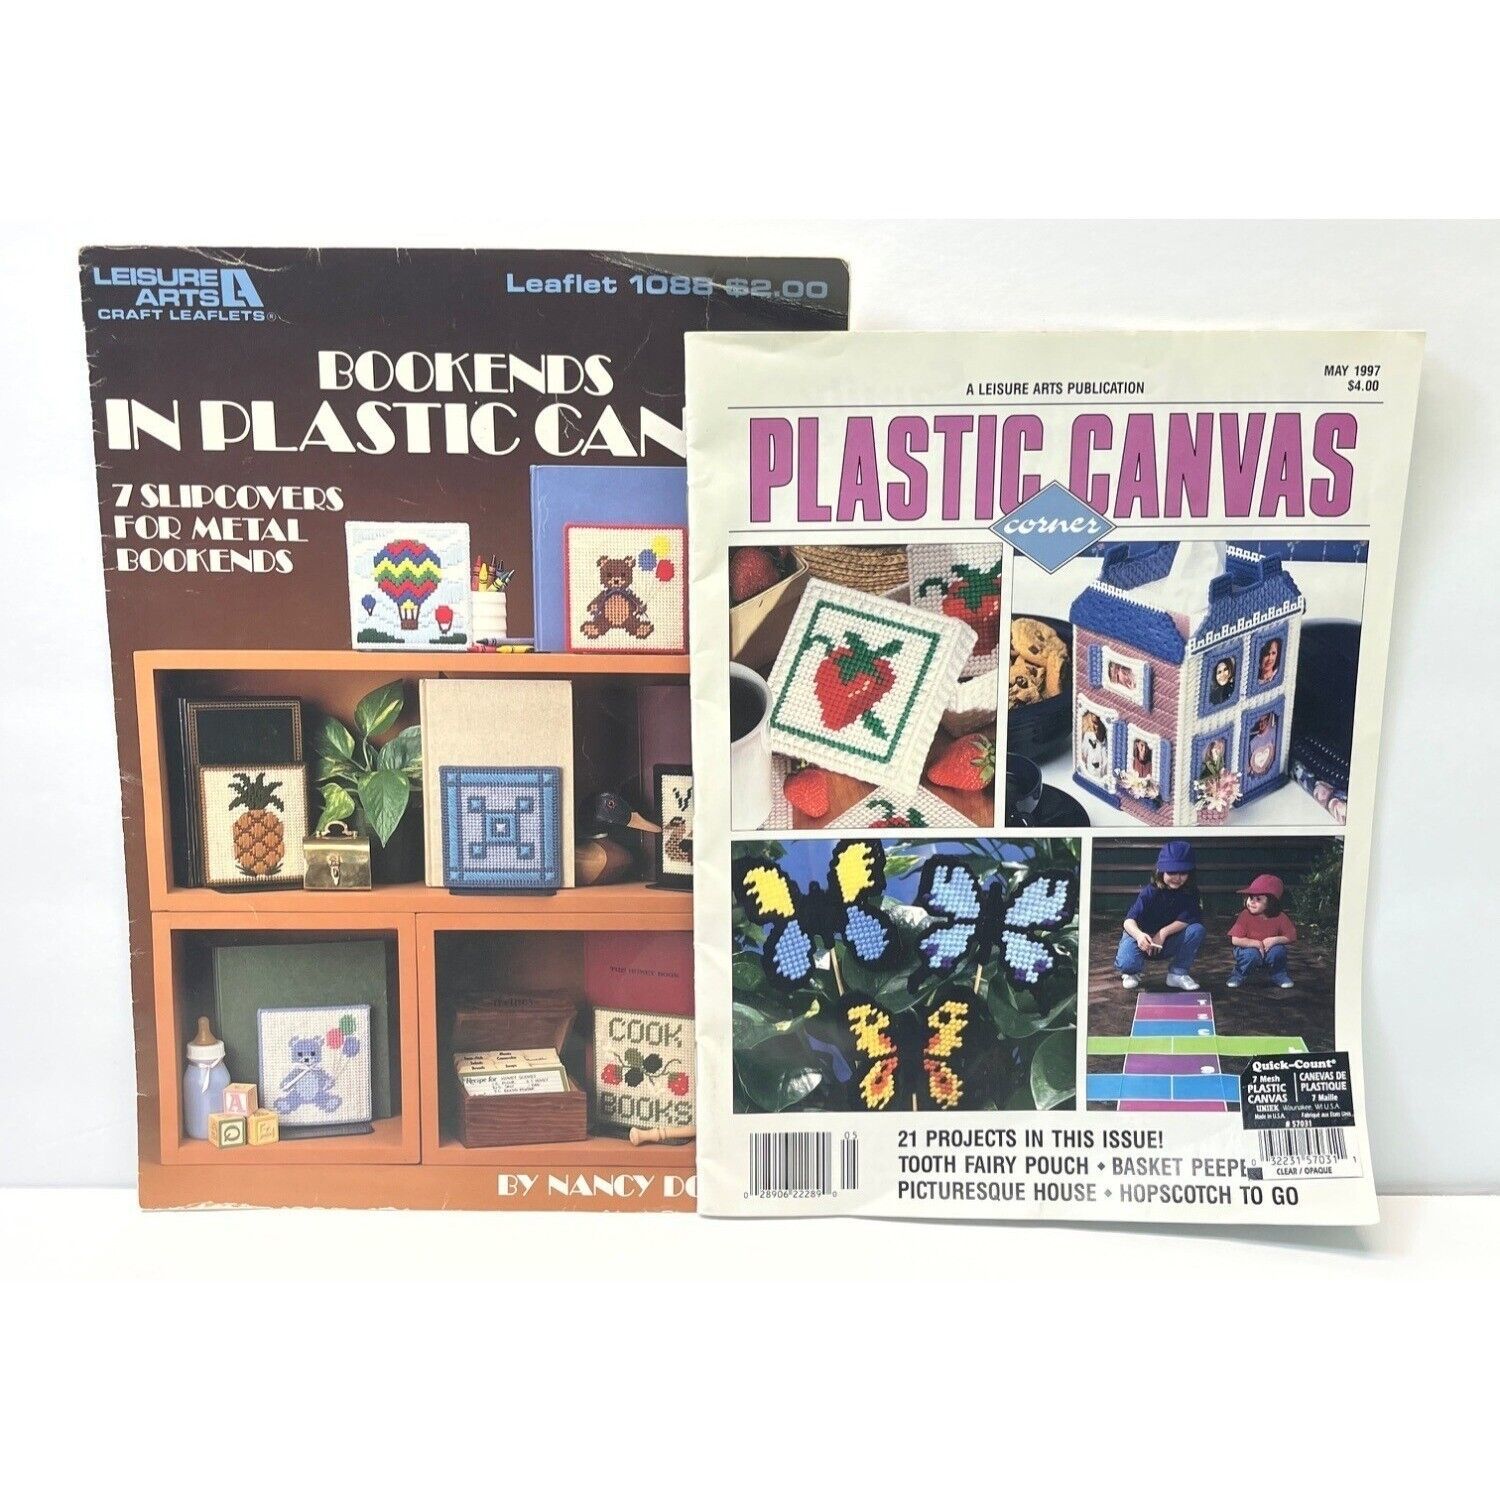 Plastic Canvas Corner Magazine May 1997 and Bookends Leaflet Leisure Arts 1088 - $9.98